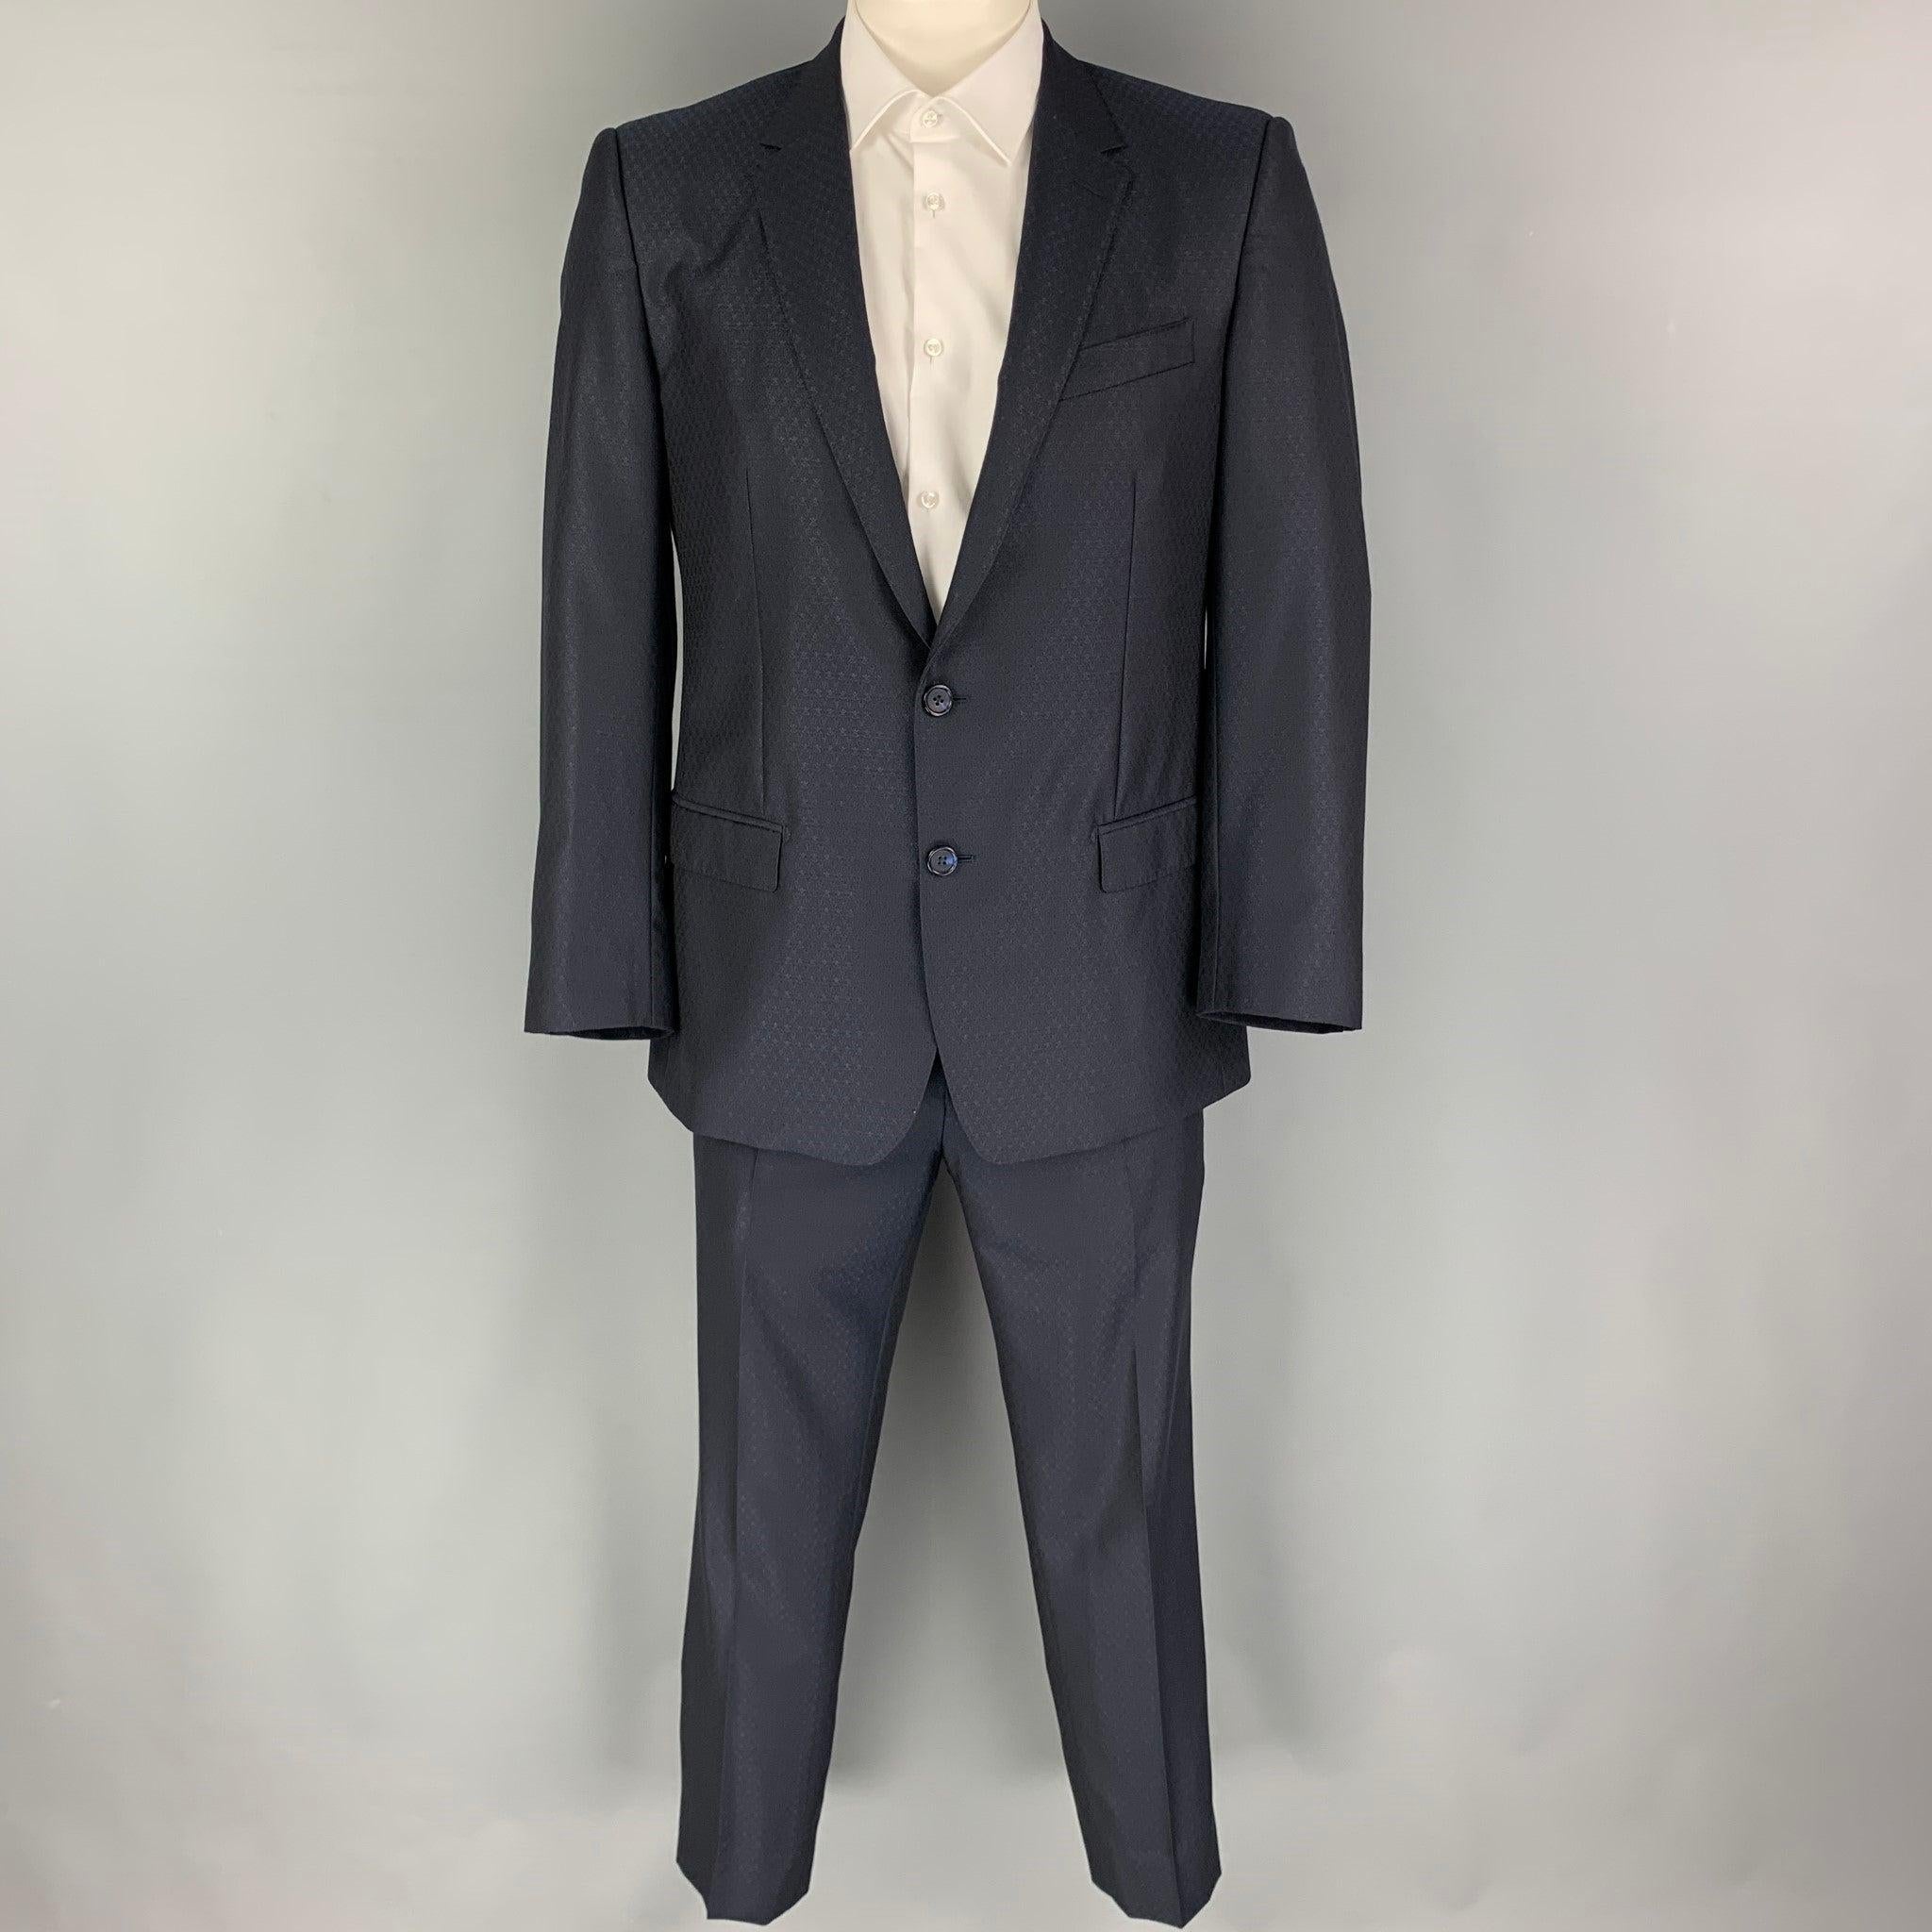 DOLCE & GABBANA suit comes in a navy print wool blend with a full liner and includes a single breasted, double button sport coat with a notch lapel and matching flat front trousers. Excellent Pre-Owned Condition. 

Marked:   52 

Measurements: 
 